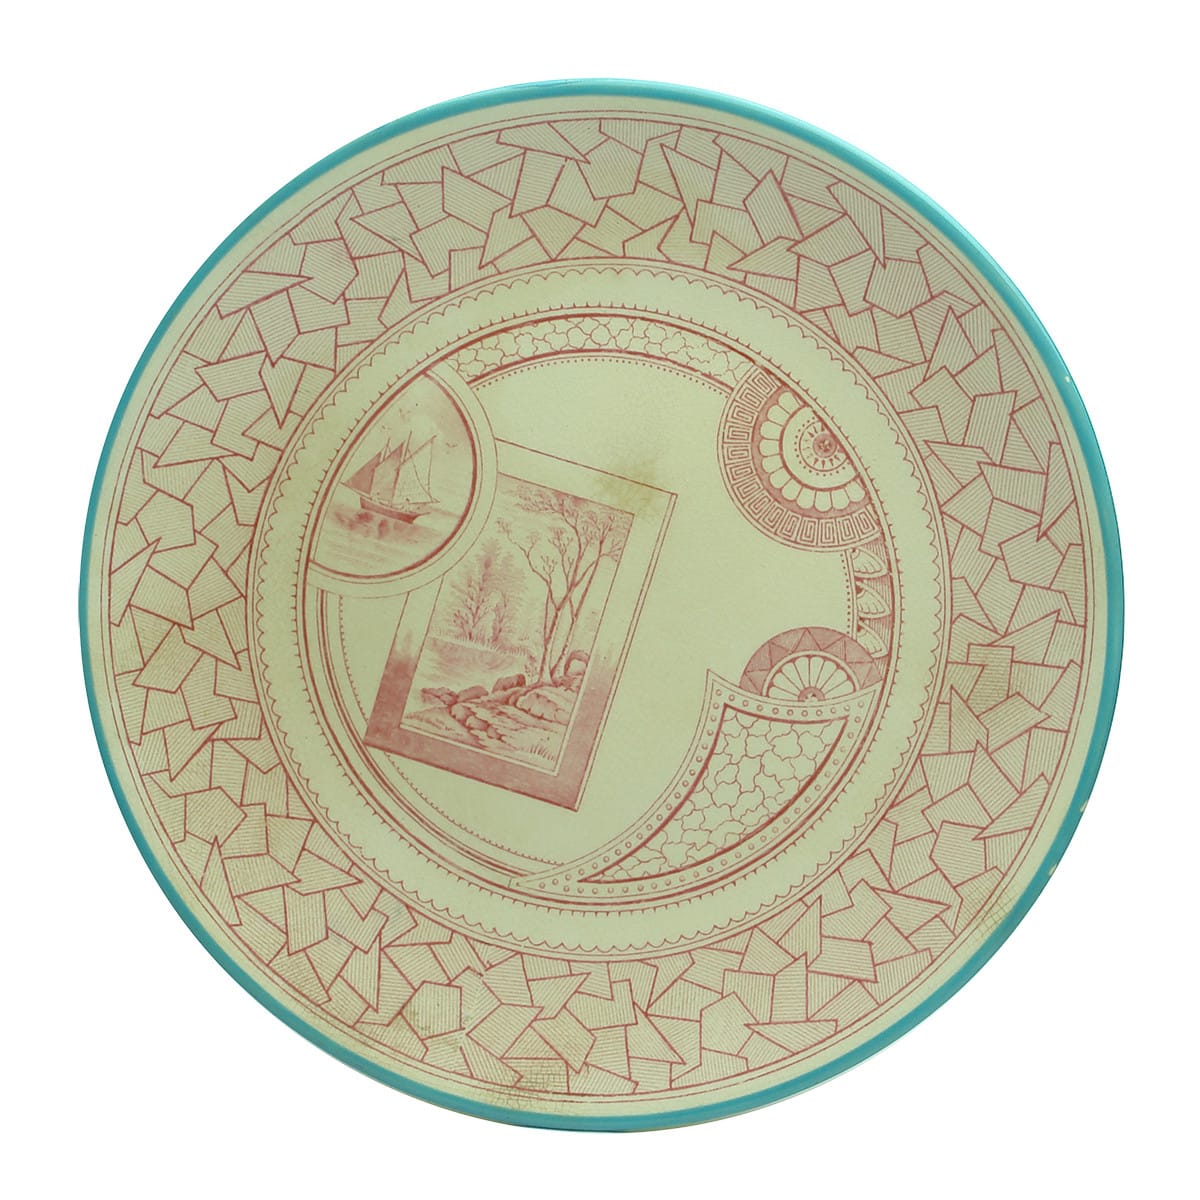 Plate. Excelsior Pattern, made for Alex Cunningham, 31 Rundle Street, Adelaide. (South Australia)